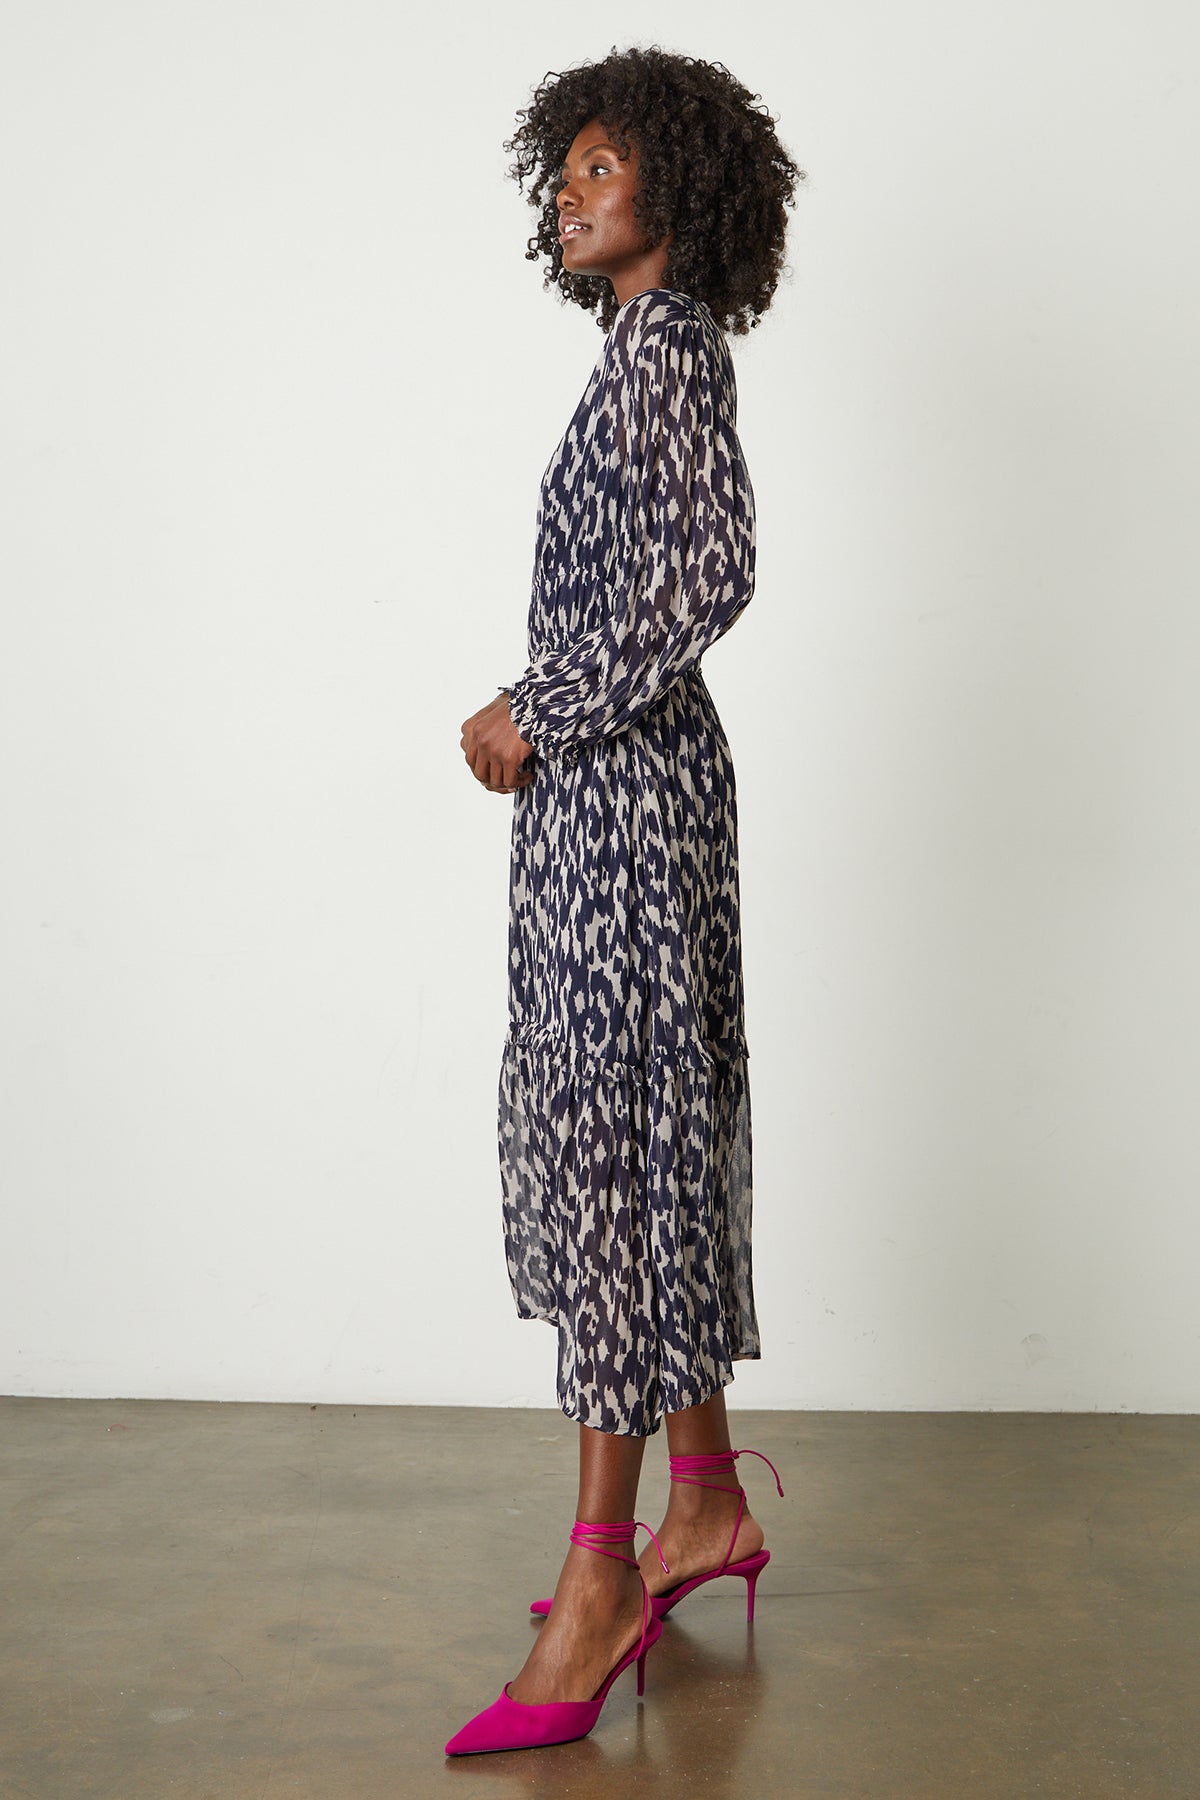 Kendra Printed Maxi Dress in calico print with hot pink heels full length side-25669297602753